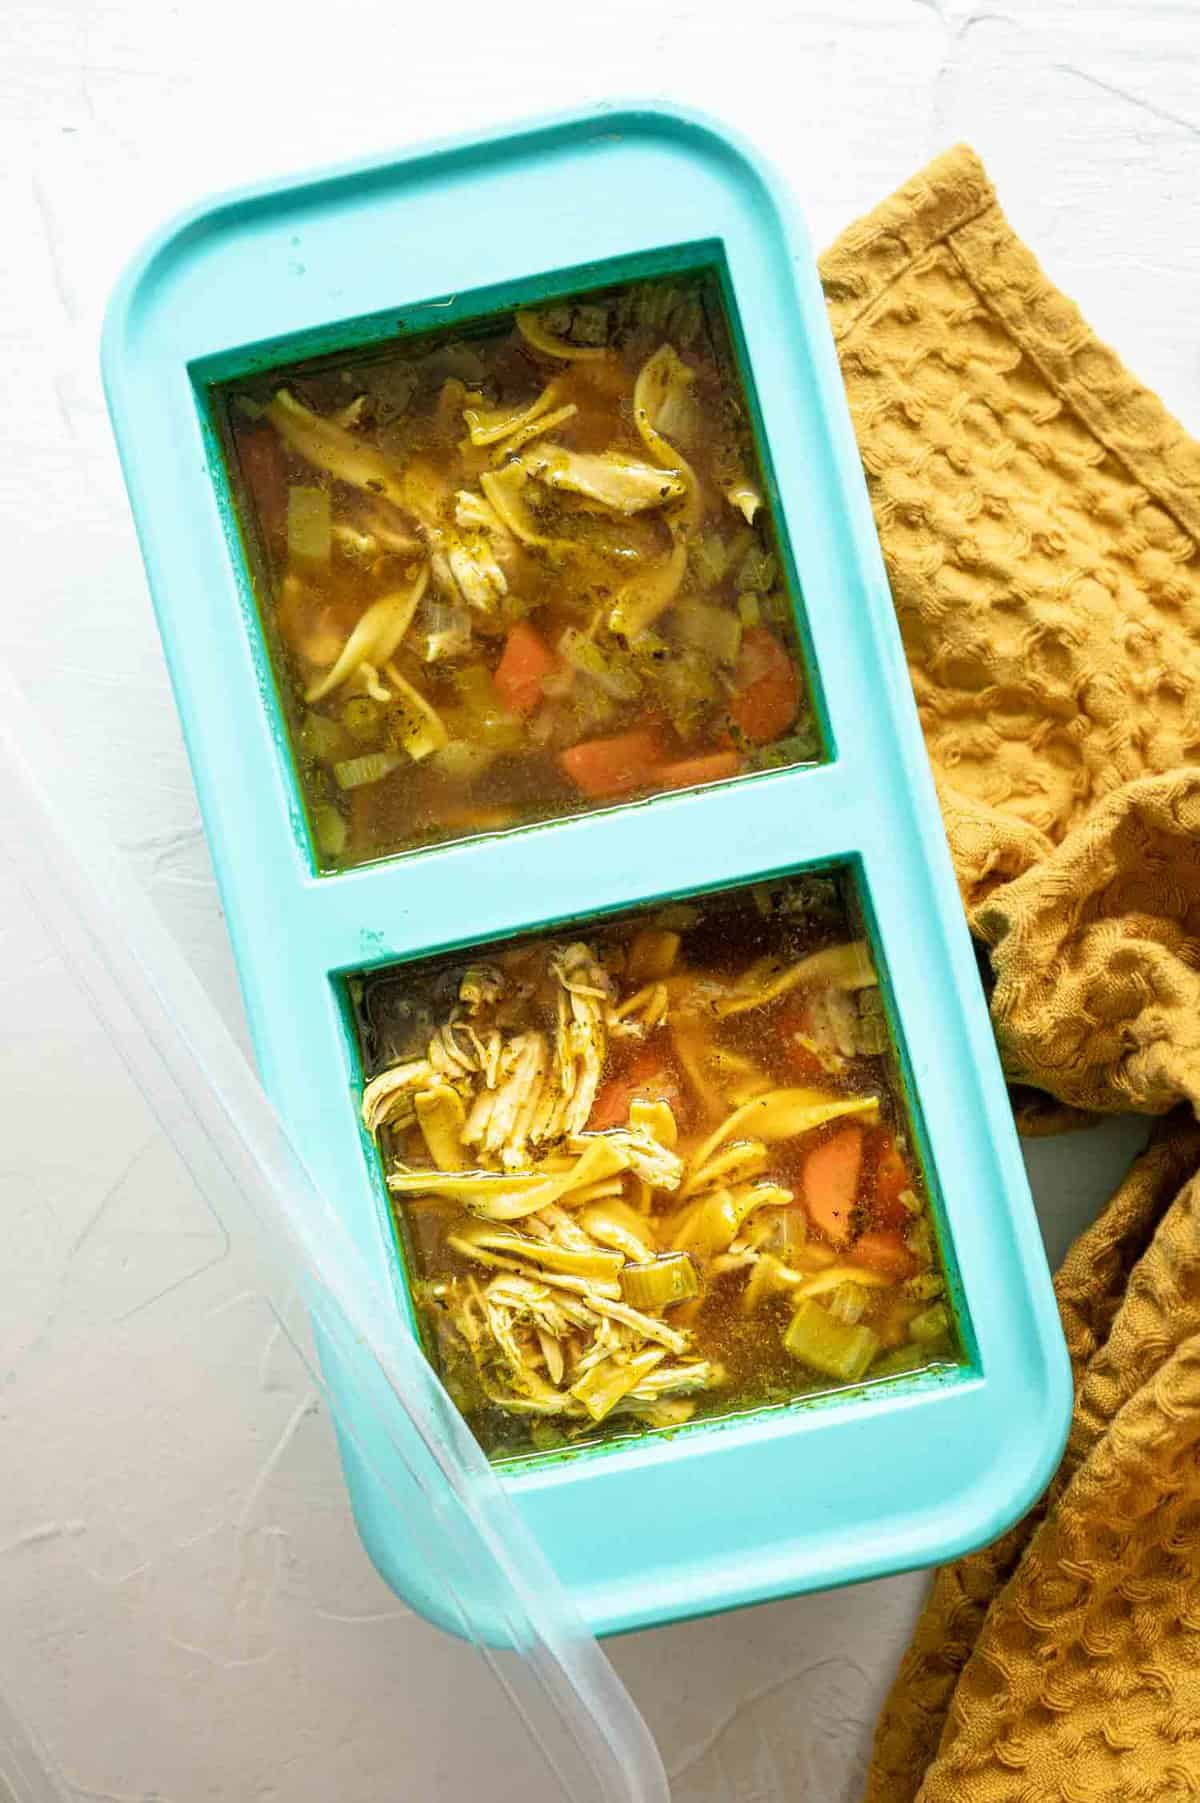 Homemade Chicken Noodle Soup in Souper Cubes to go into the freezer.